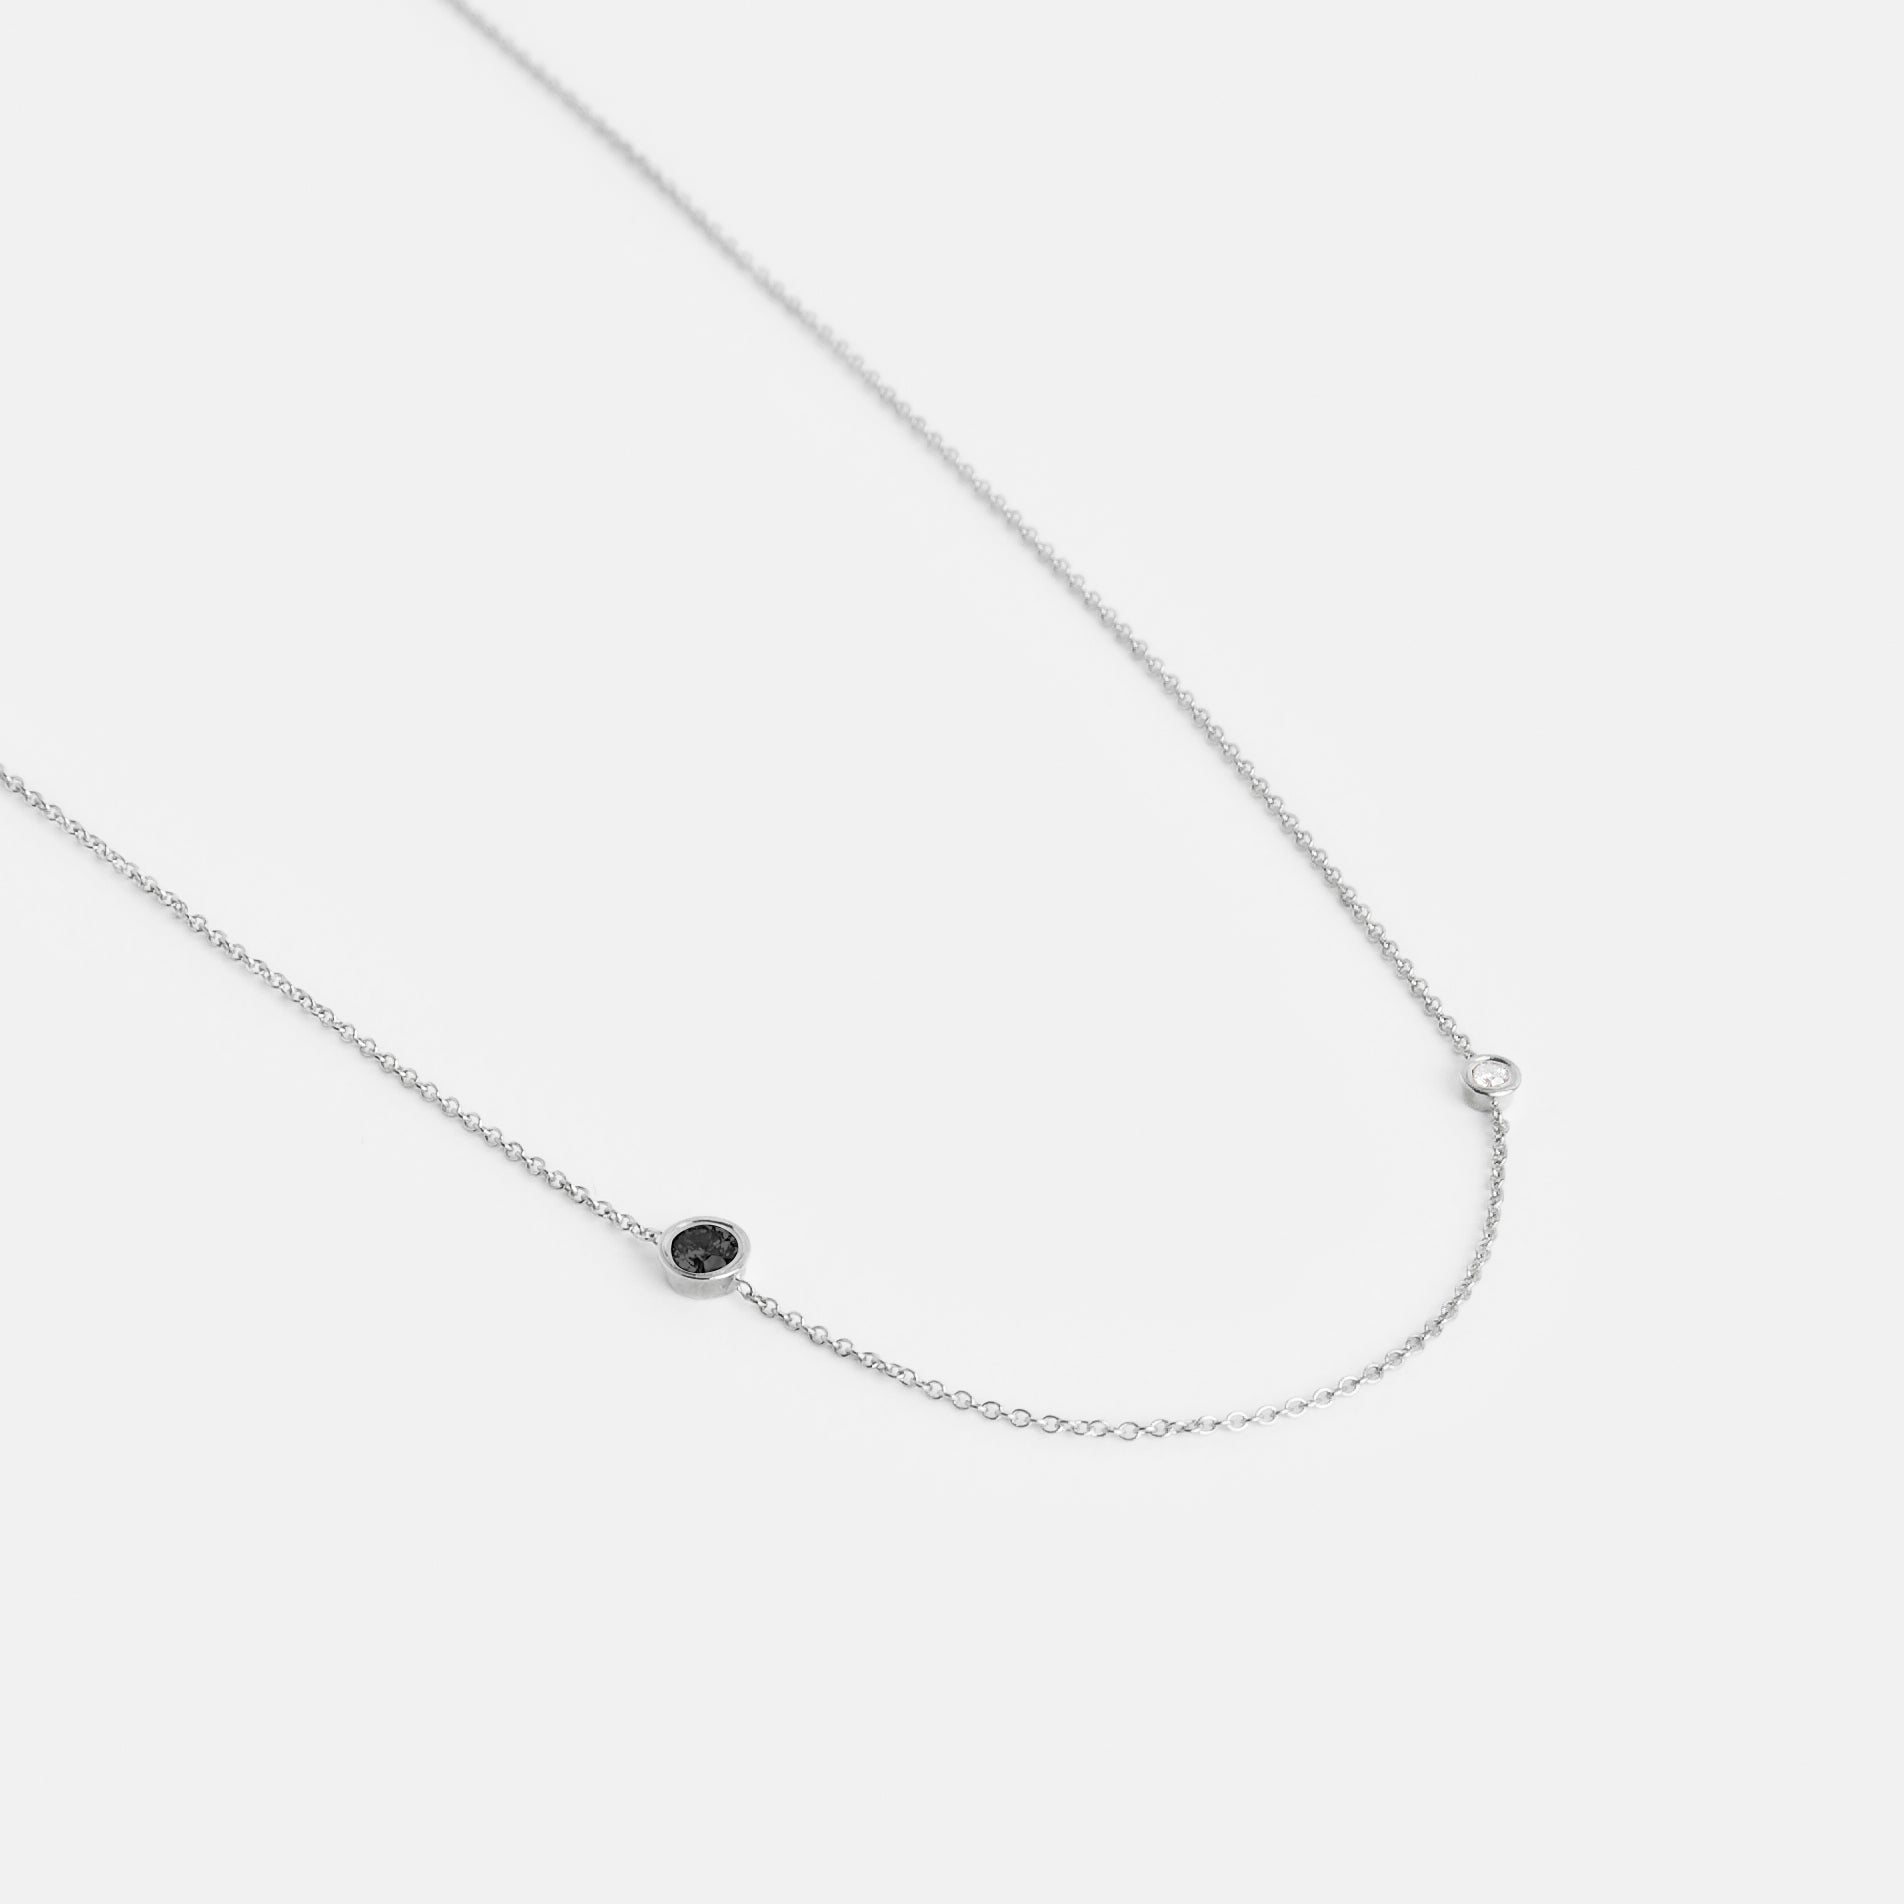 Iba Minimalist Necklace in 14k White Gold set with Black and White Diamonds By SHW Fine Jewelry NYC